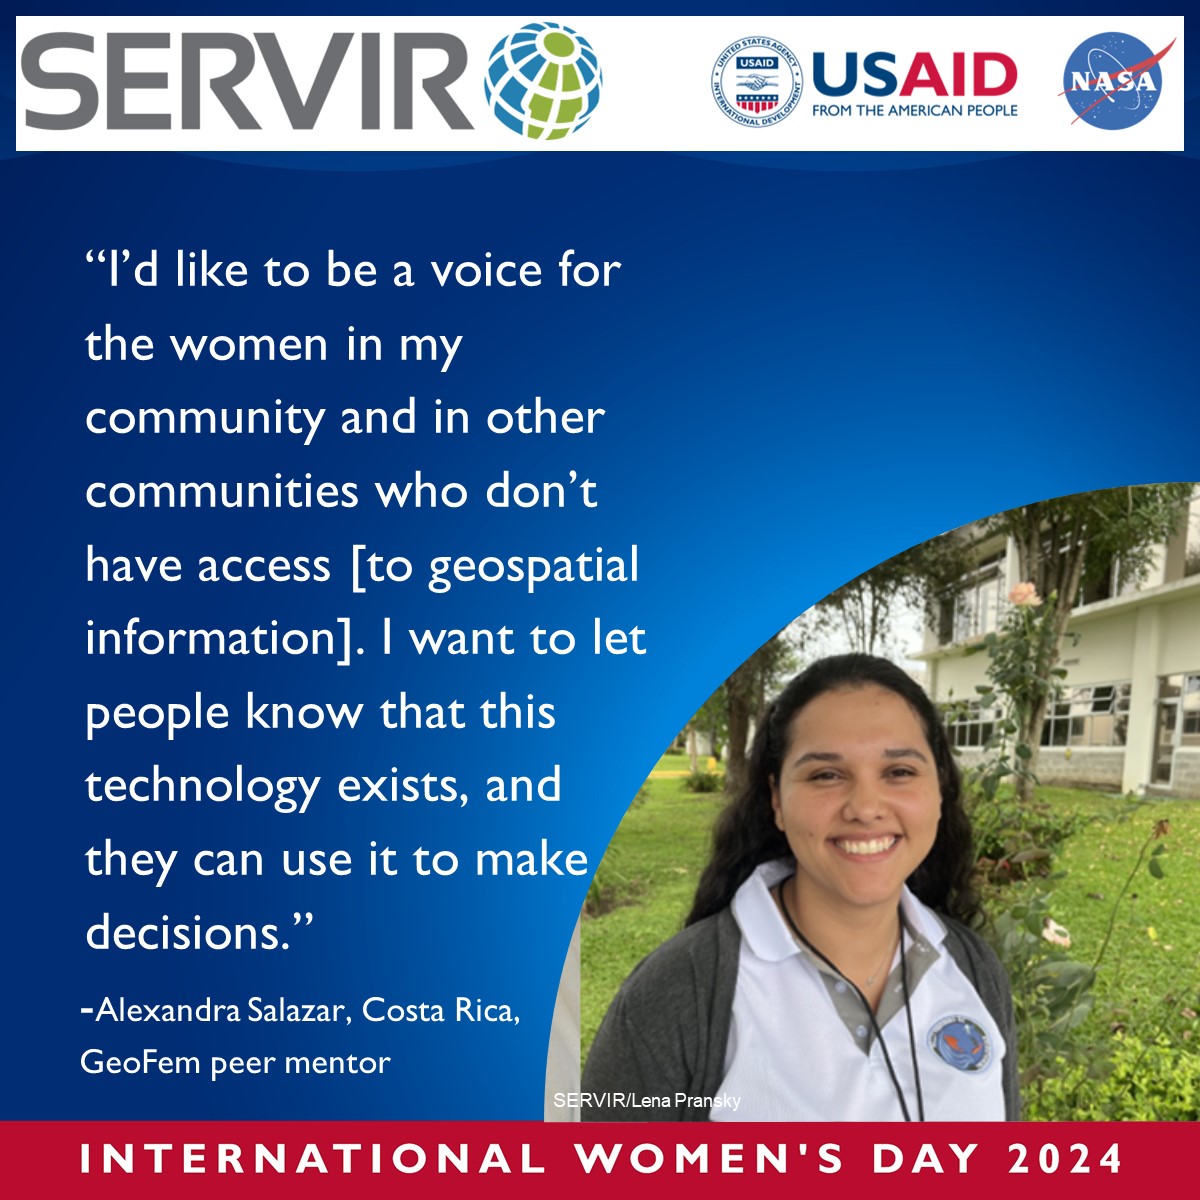 From the GeoFem event with @IICAnews in Costa Rica, peer mentor, Alexandra, shared her desire to be a voice for women and increase access to geospatial information. #IWD2024 #InvestInWomen Learn more about GeoFem here: servirglobal.net/news/geofem-wo…